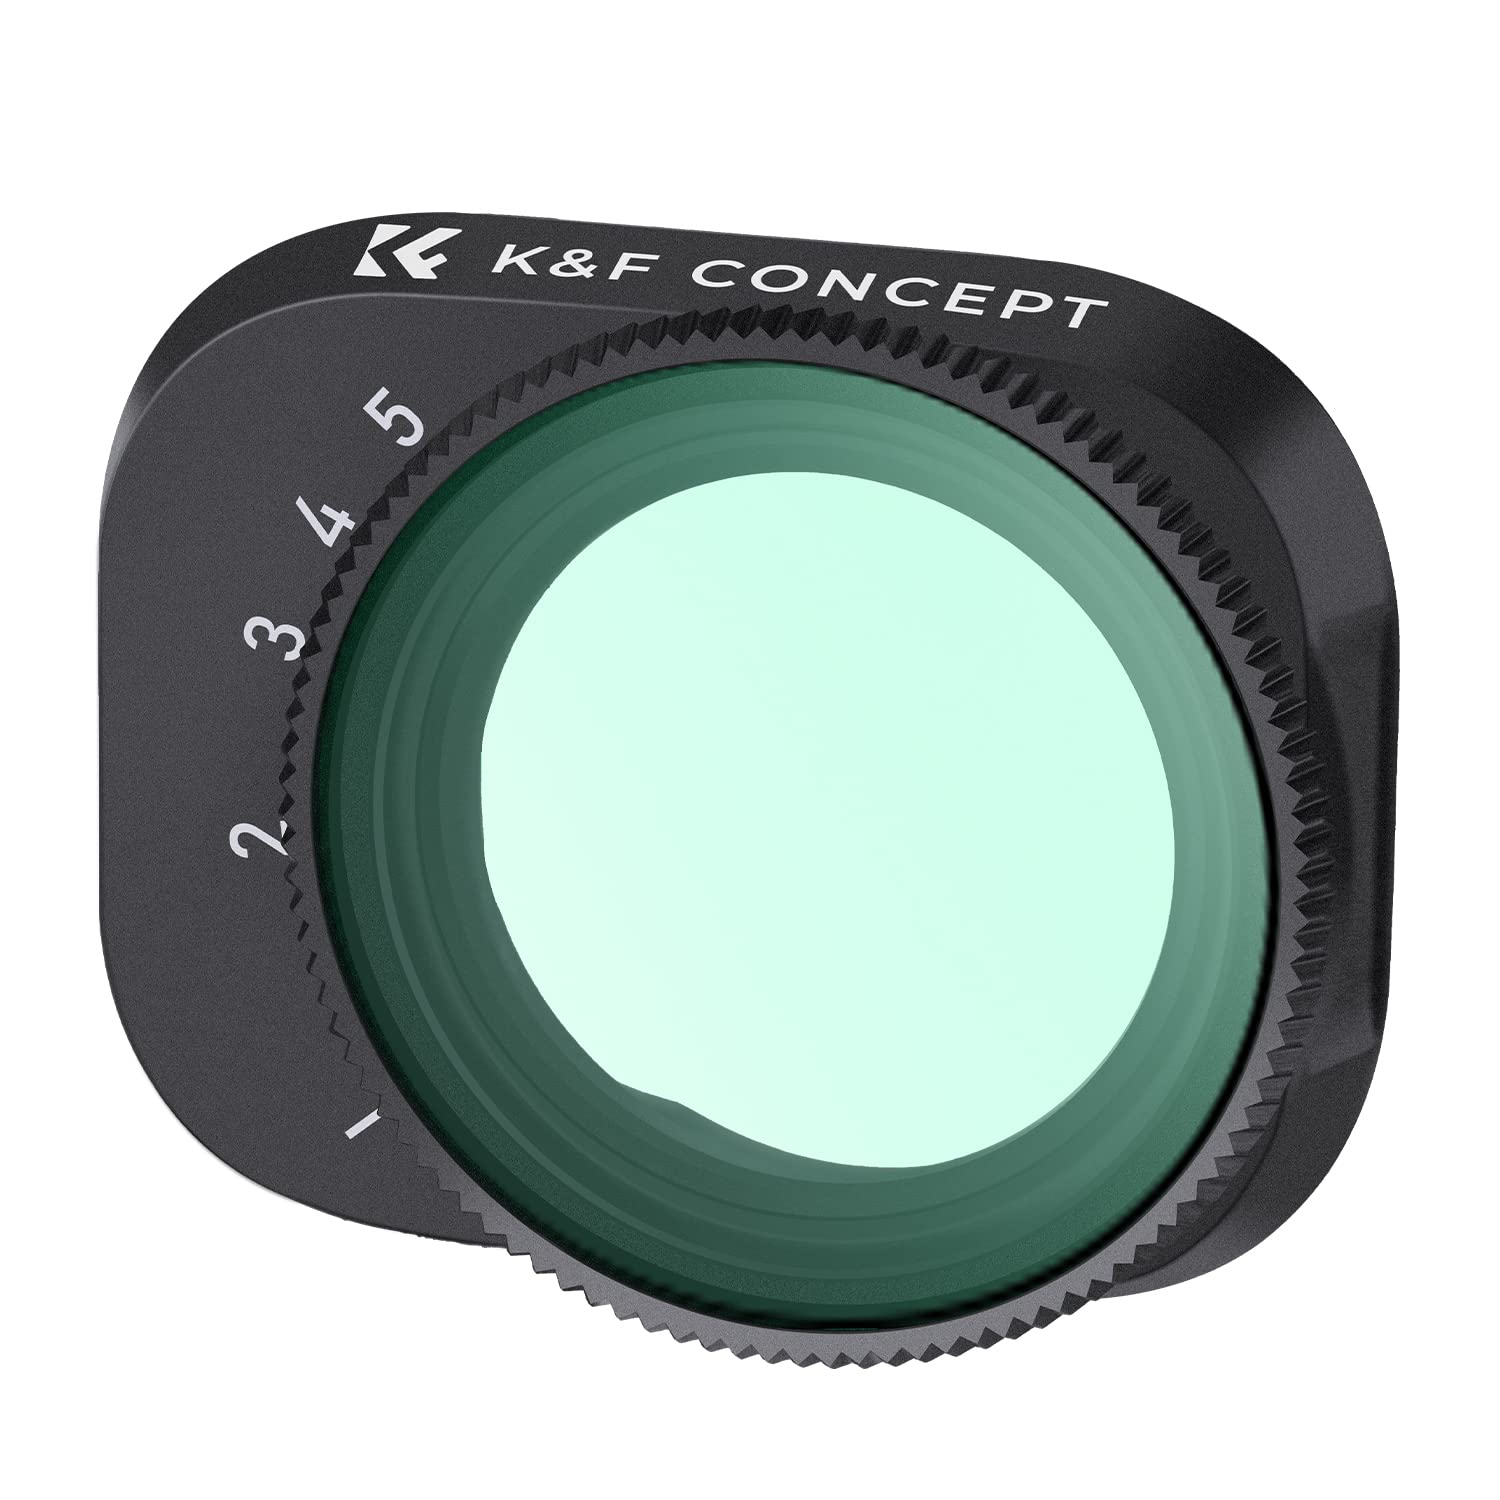 K&F Concept Mini 3 Pro Variable ND2-32 (1-5 Stop) ND Filter